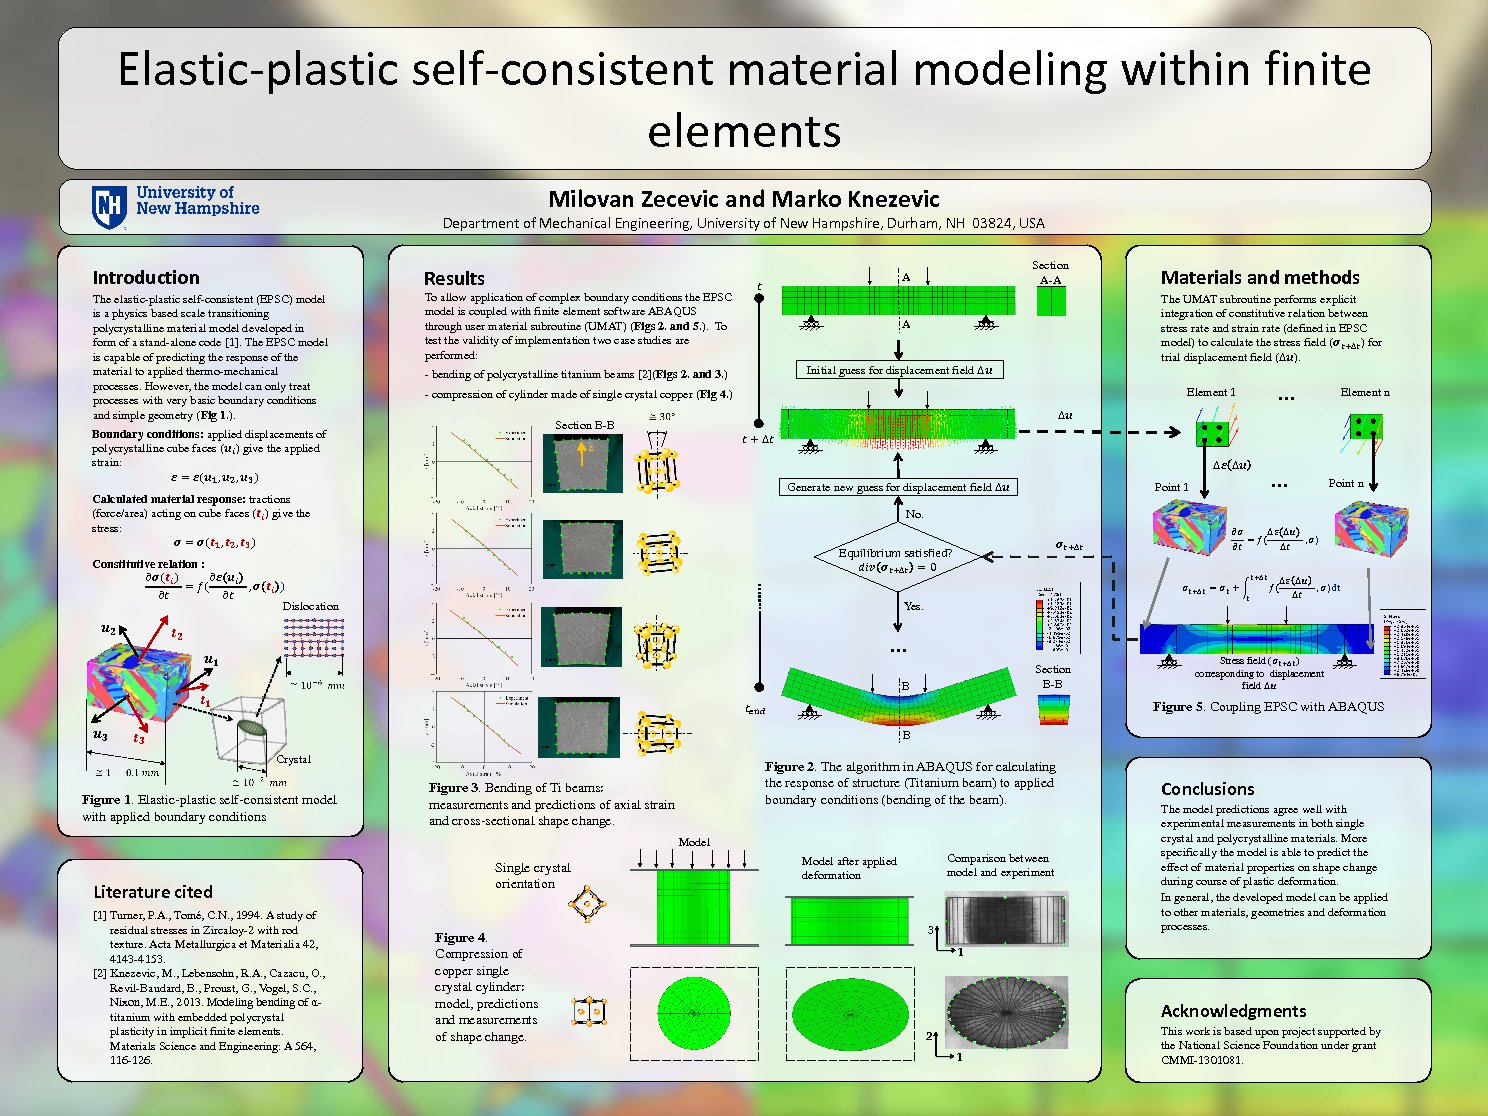 Elastic-Plastic Self-Consistent Material Modeling Within Finite Elements by mz2